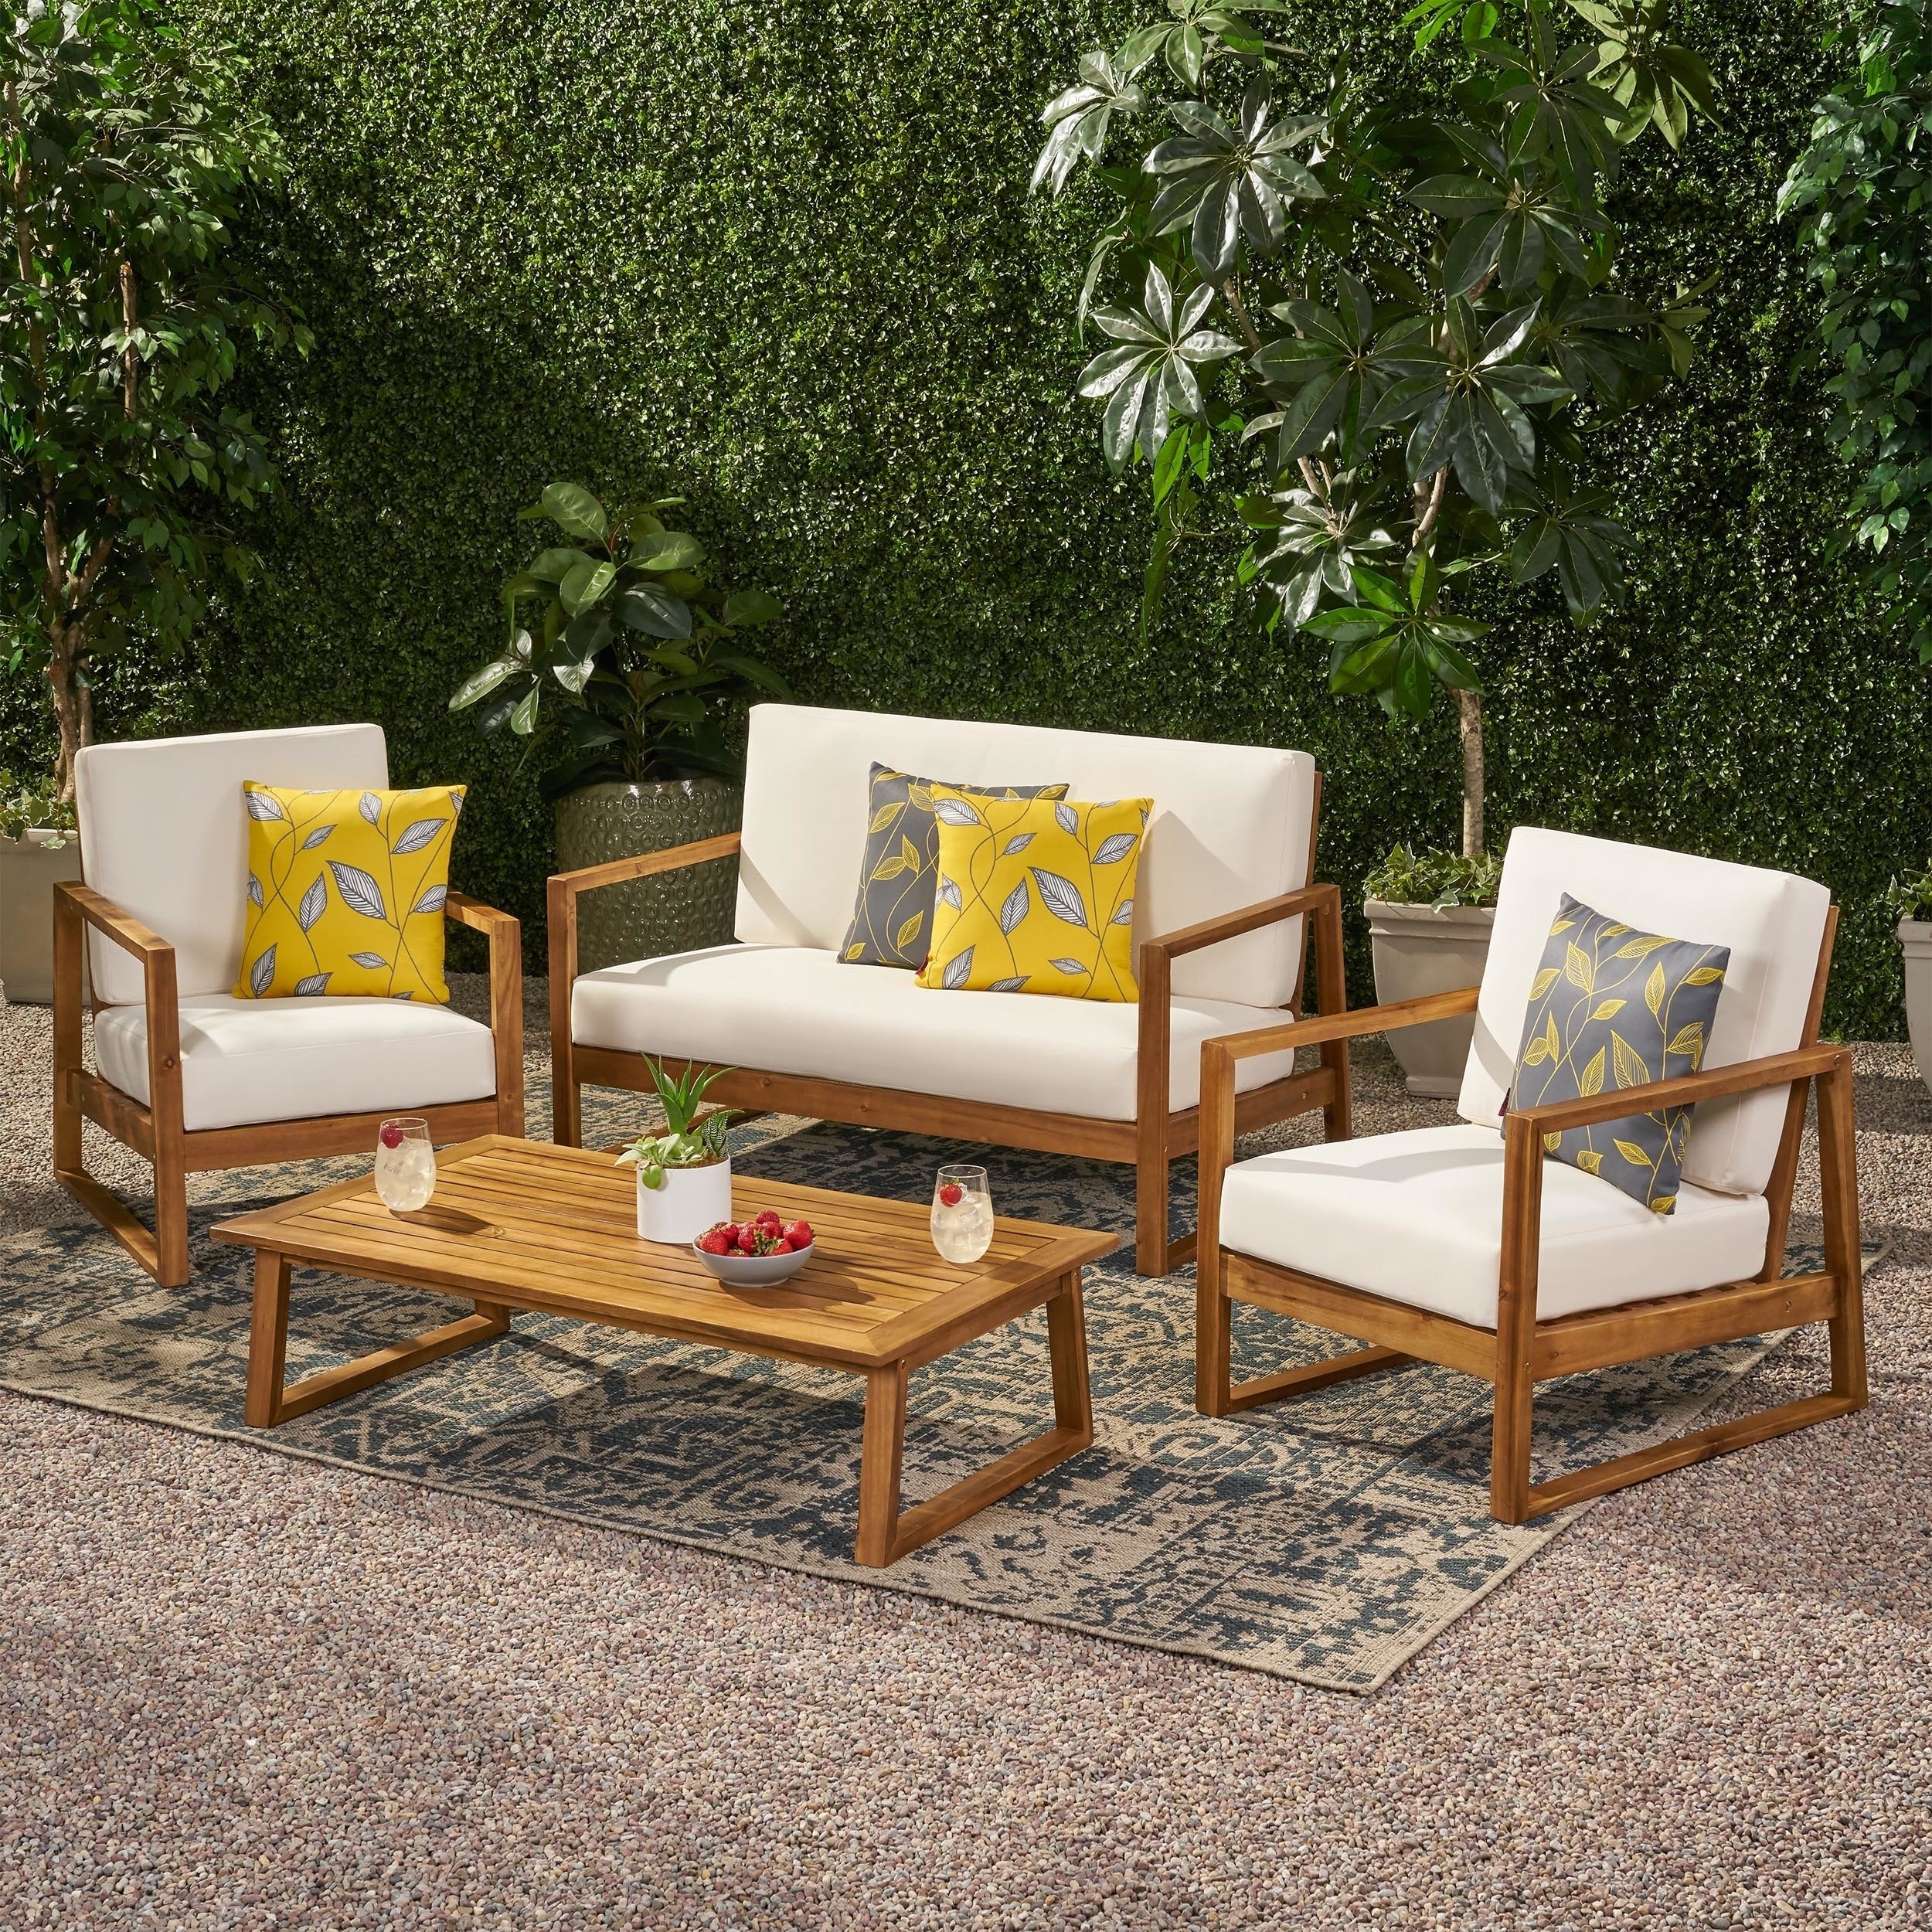 Regina Outdoor Acacia Wood 4 Seater Chat Set With Coffee Table - Teak Finish, Beige